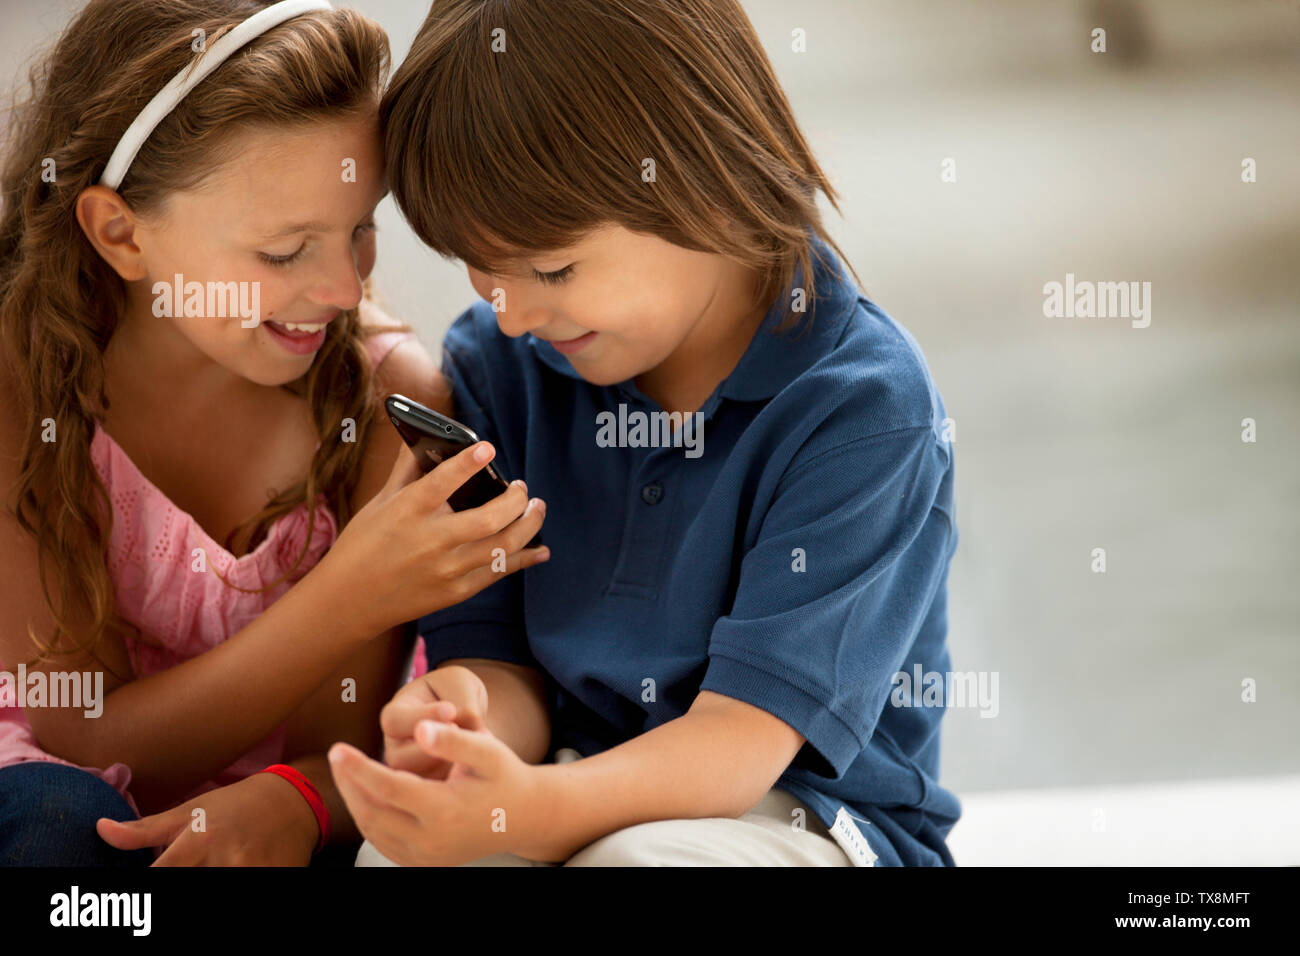 A young boy and girl smile mischievously as they look at a cellphone. Stock Photo